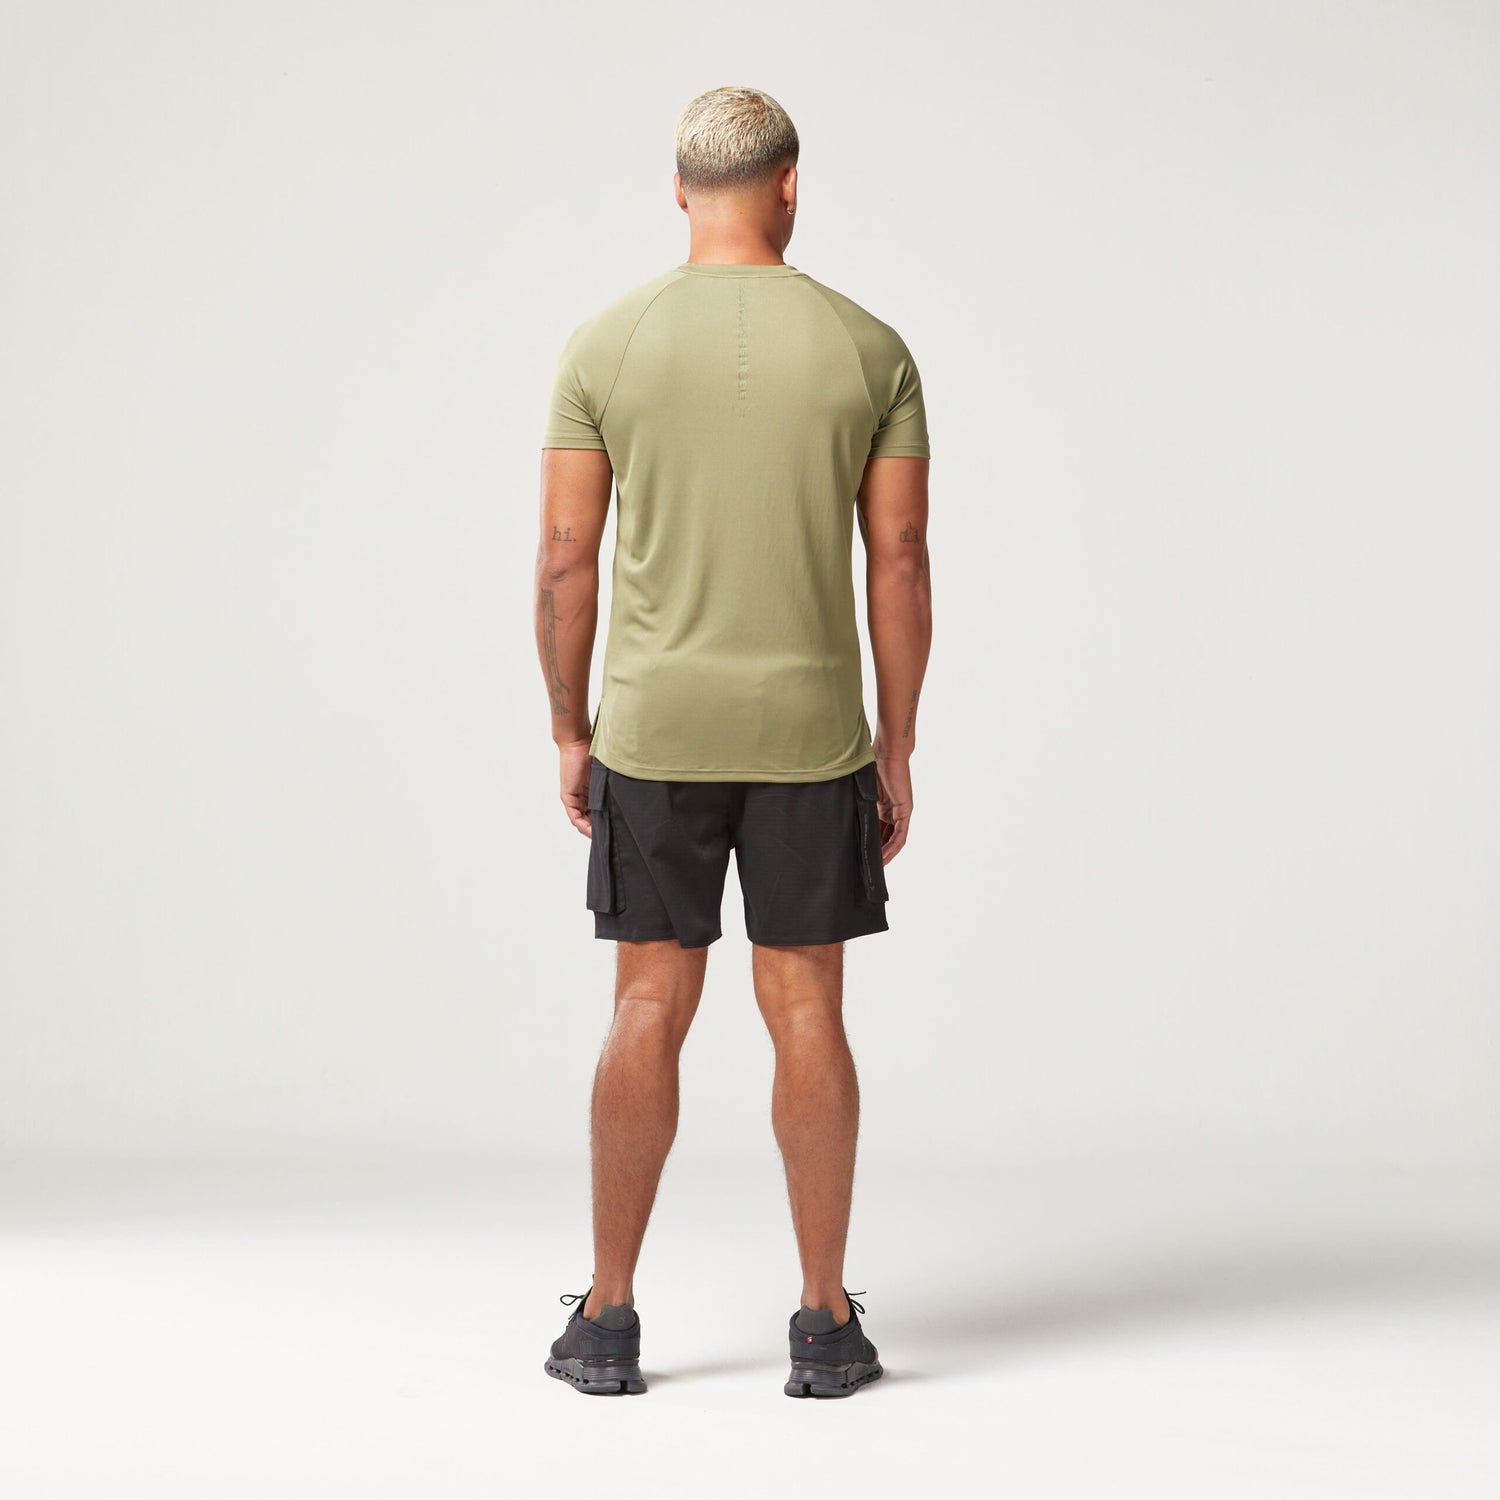 squatwolf-gym-wear-code-muscle-tee-green-workout-shirts-for-men